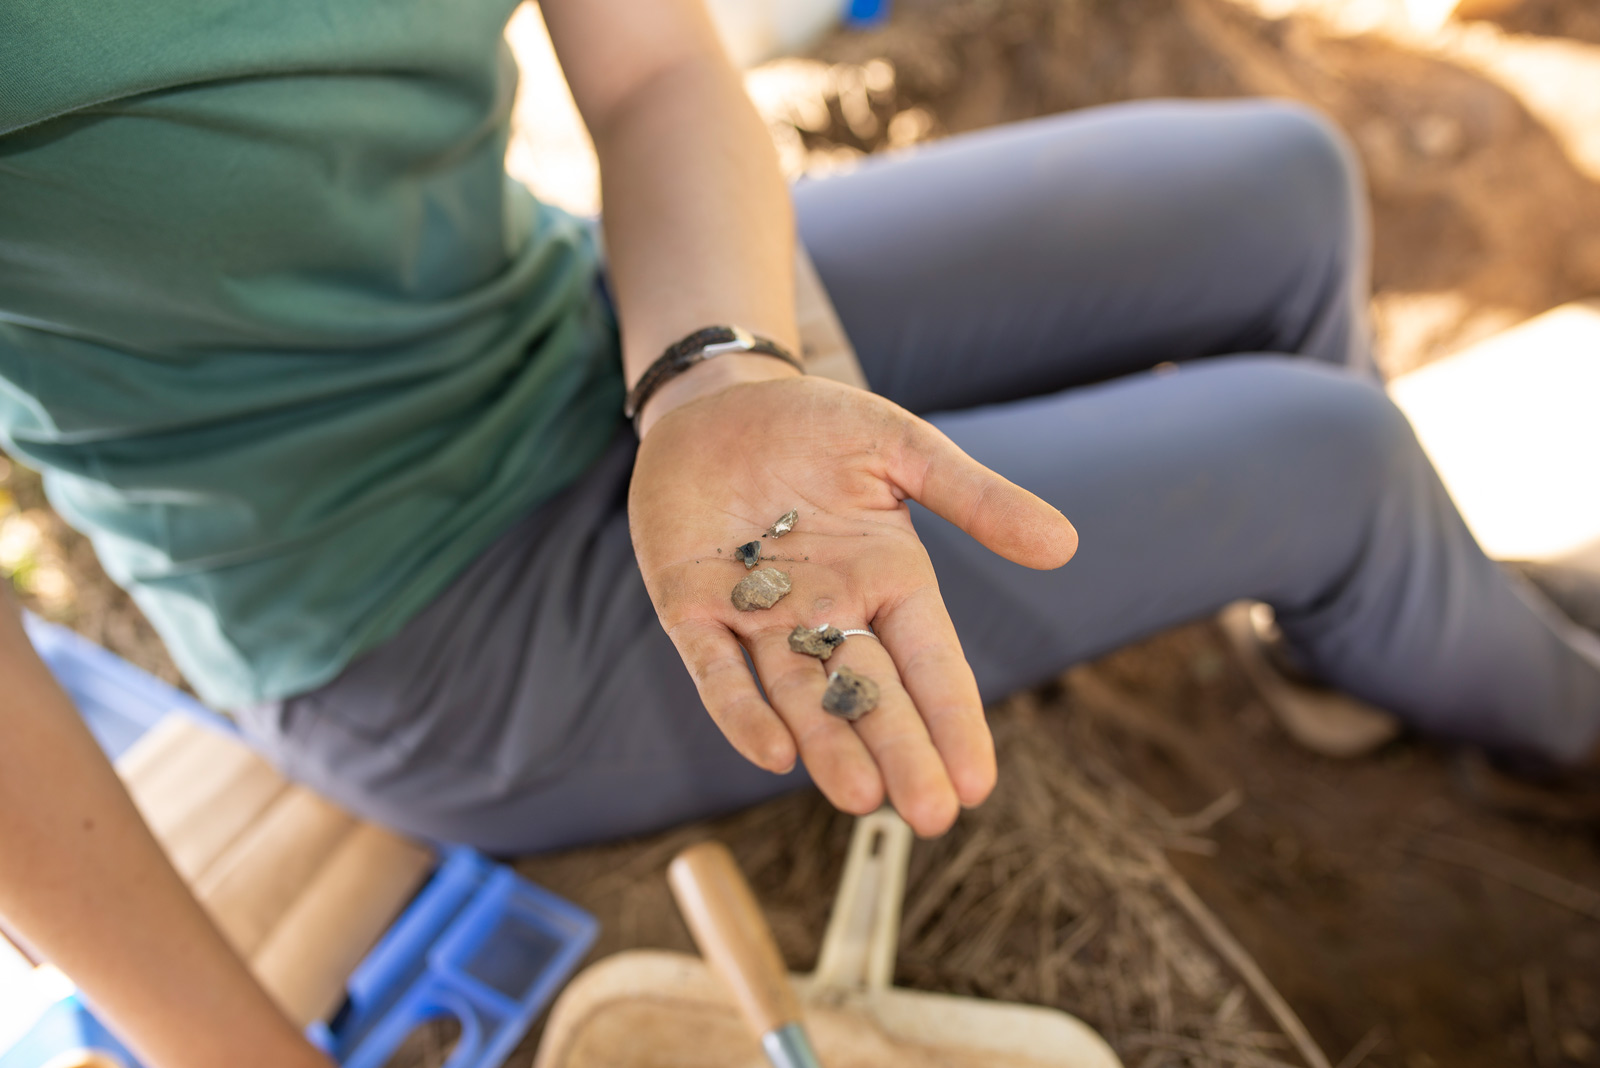 A researcher holds up ancient burned bone fragments